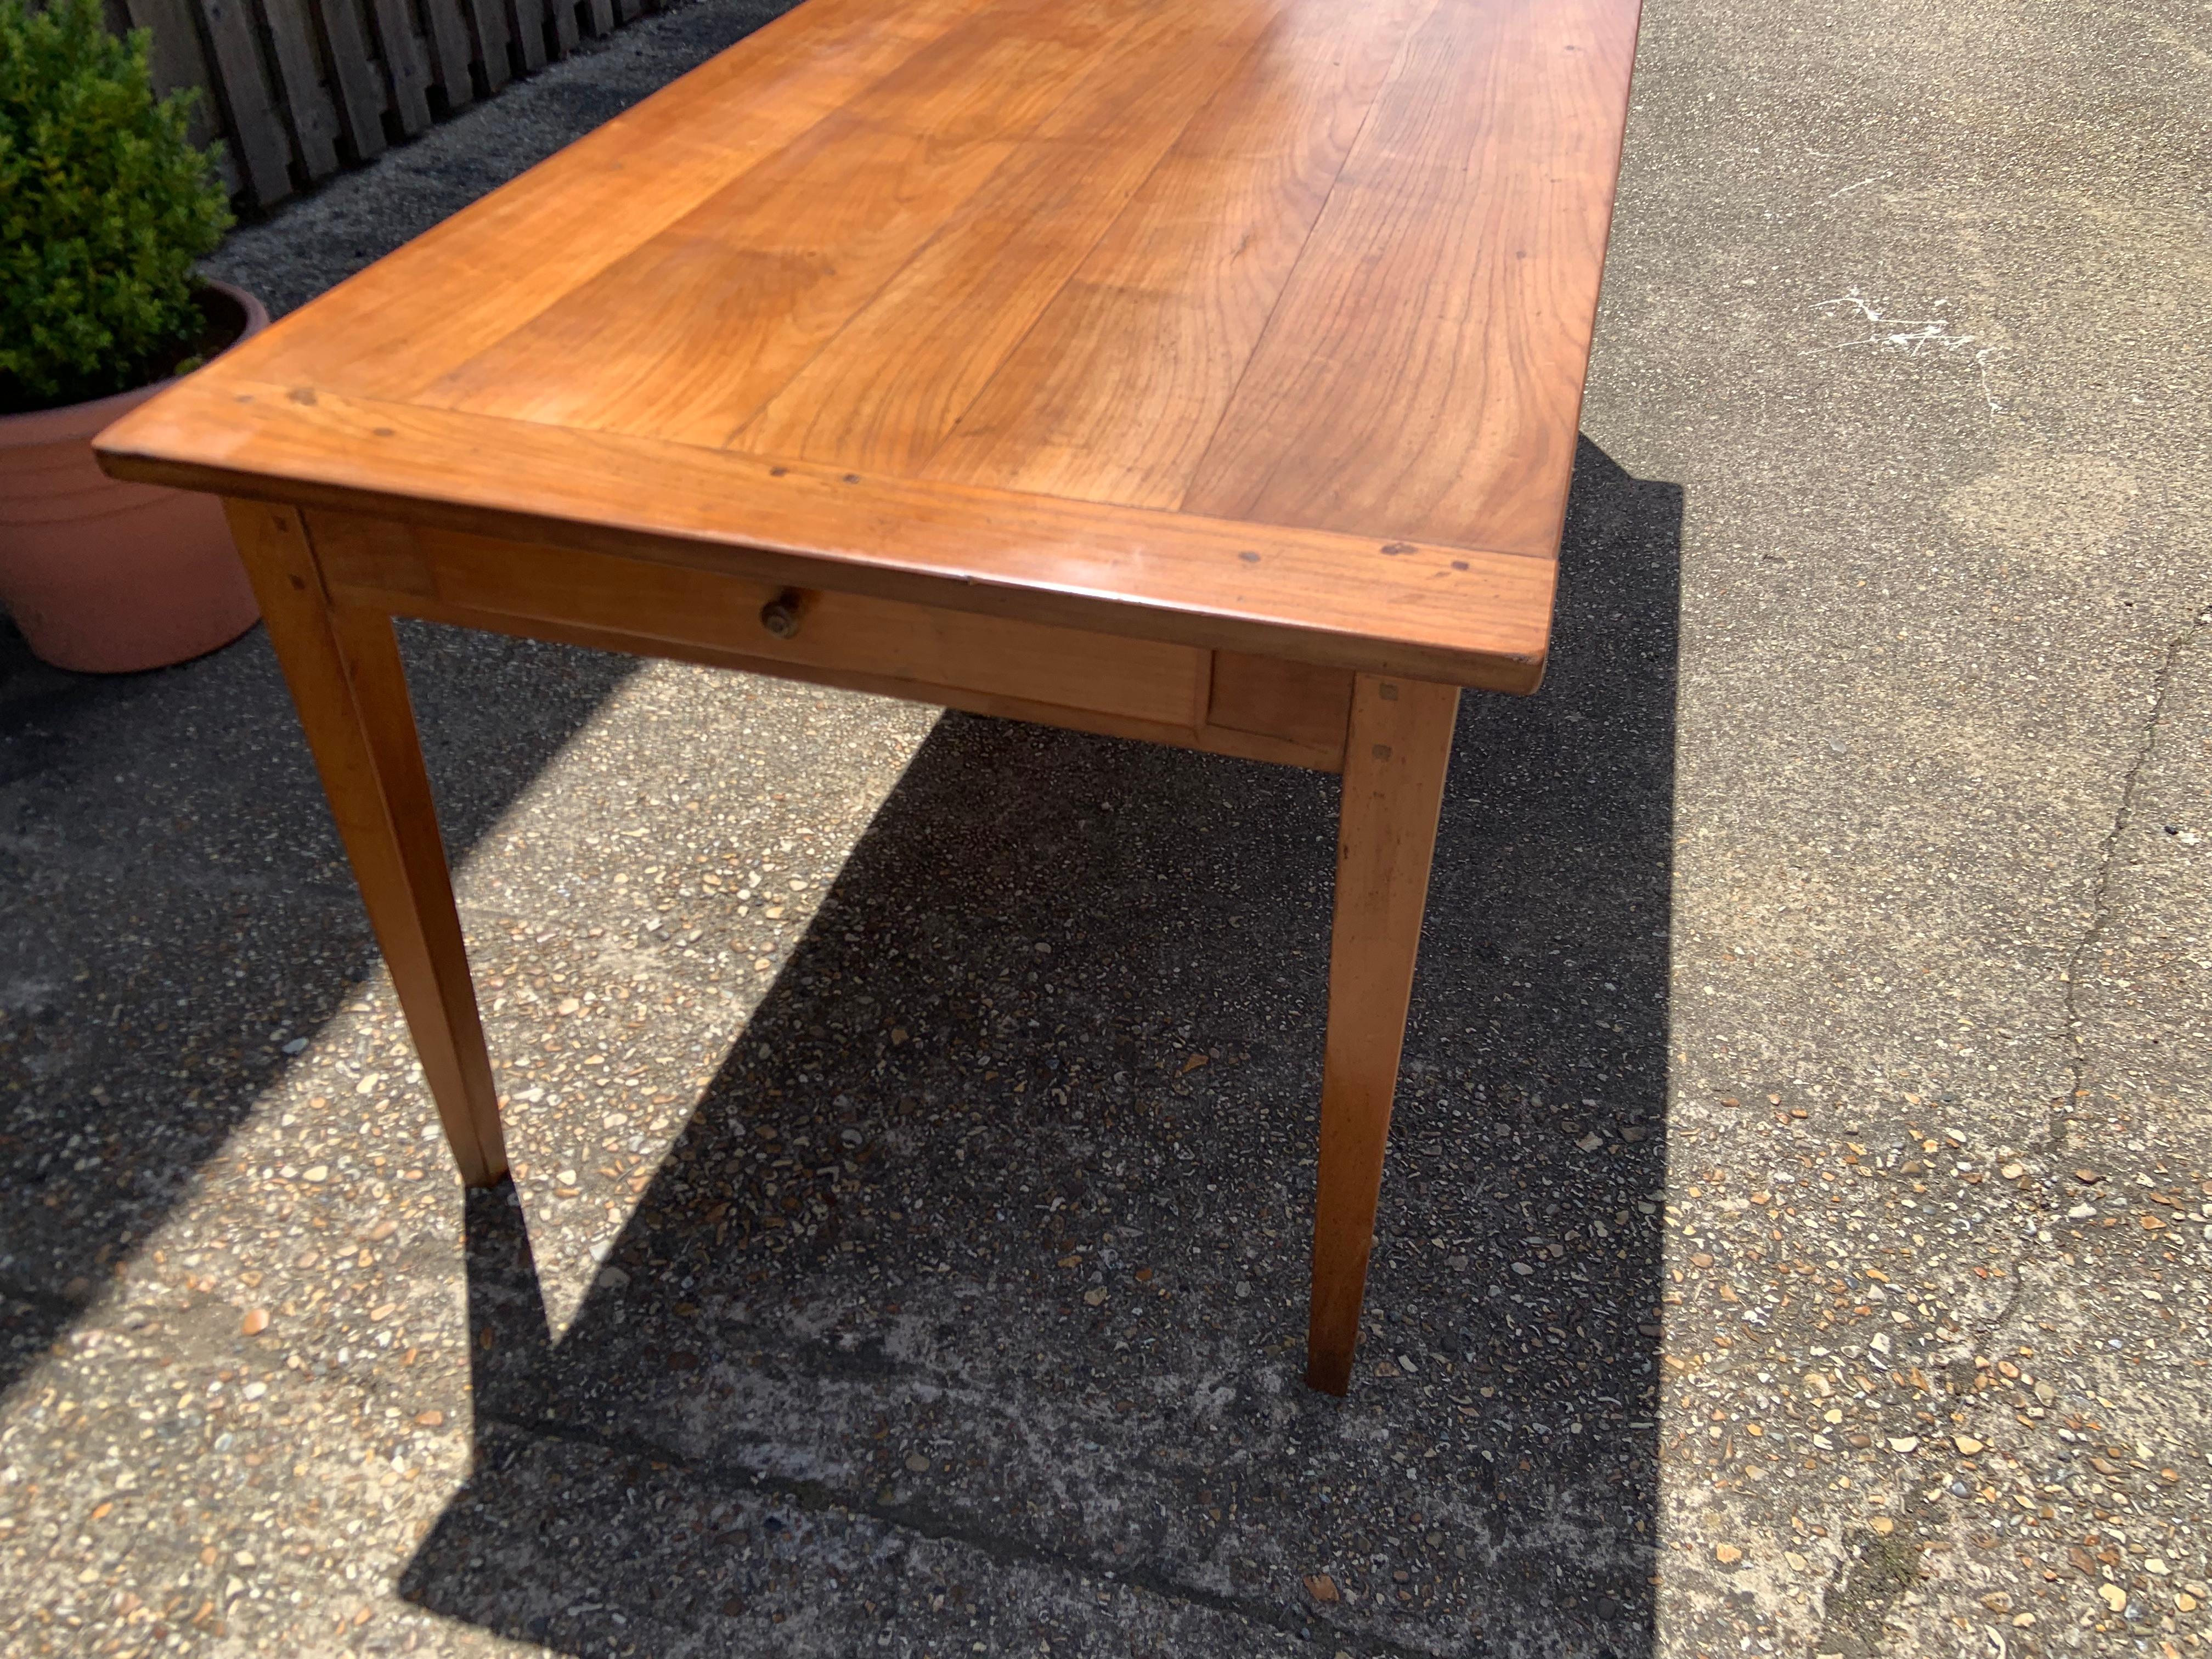 Antique cherry tapered leg dining table with lovely wide top and cleated ends. The table has one good size drawer on one end. The table is a mellow cherry in colour, the table sits on four tapered legs with ample of leg room at each end. The table